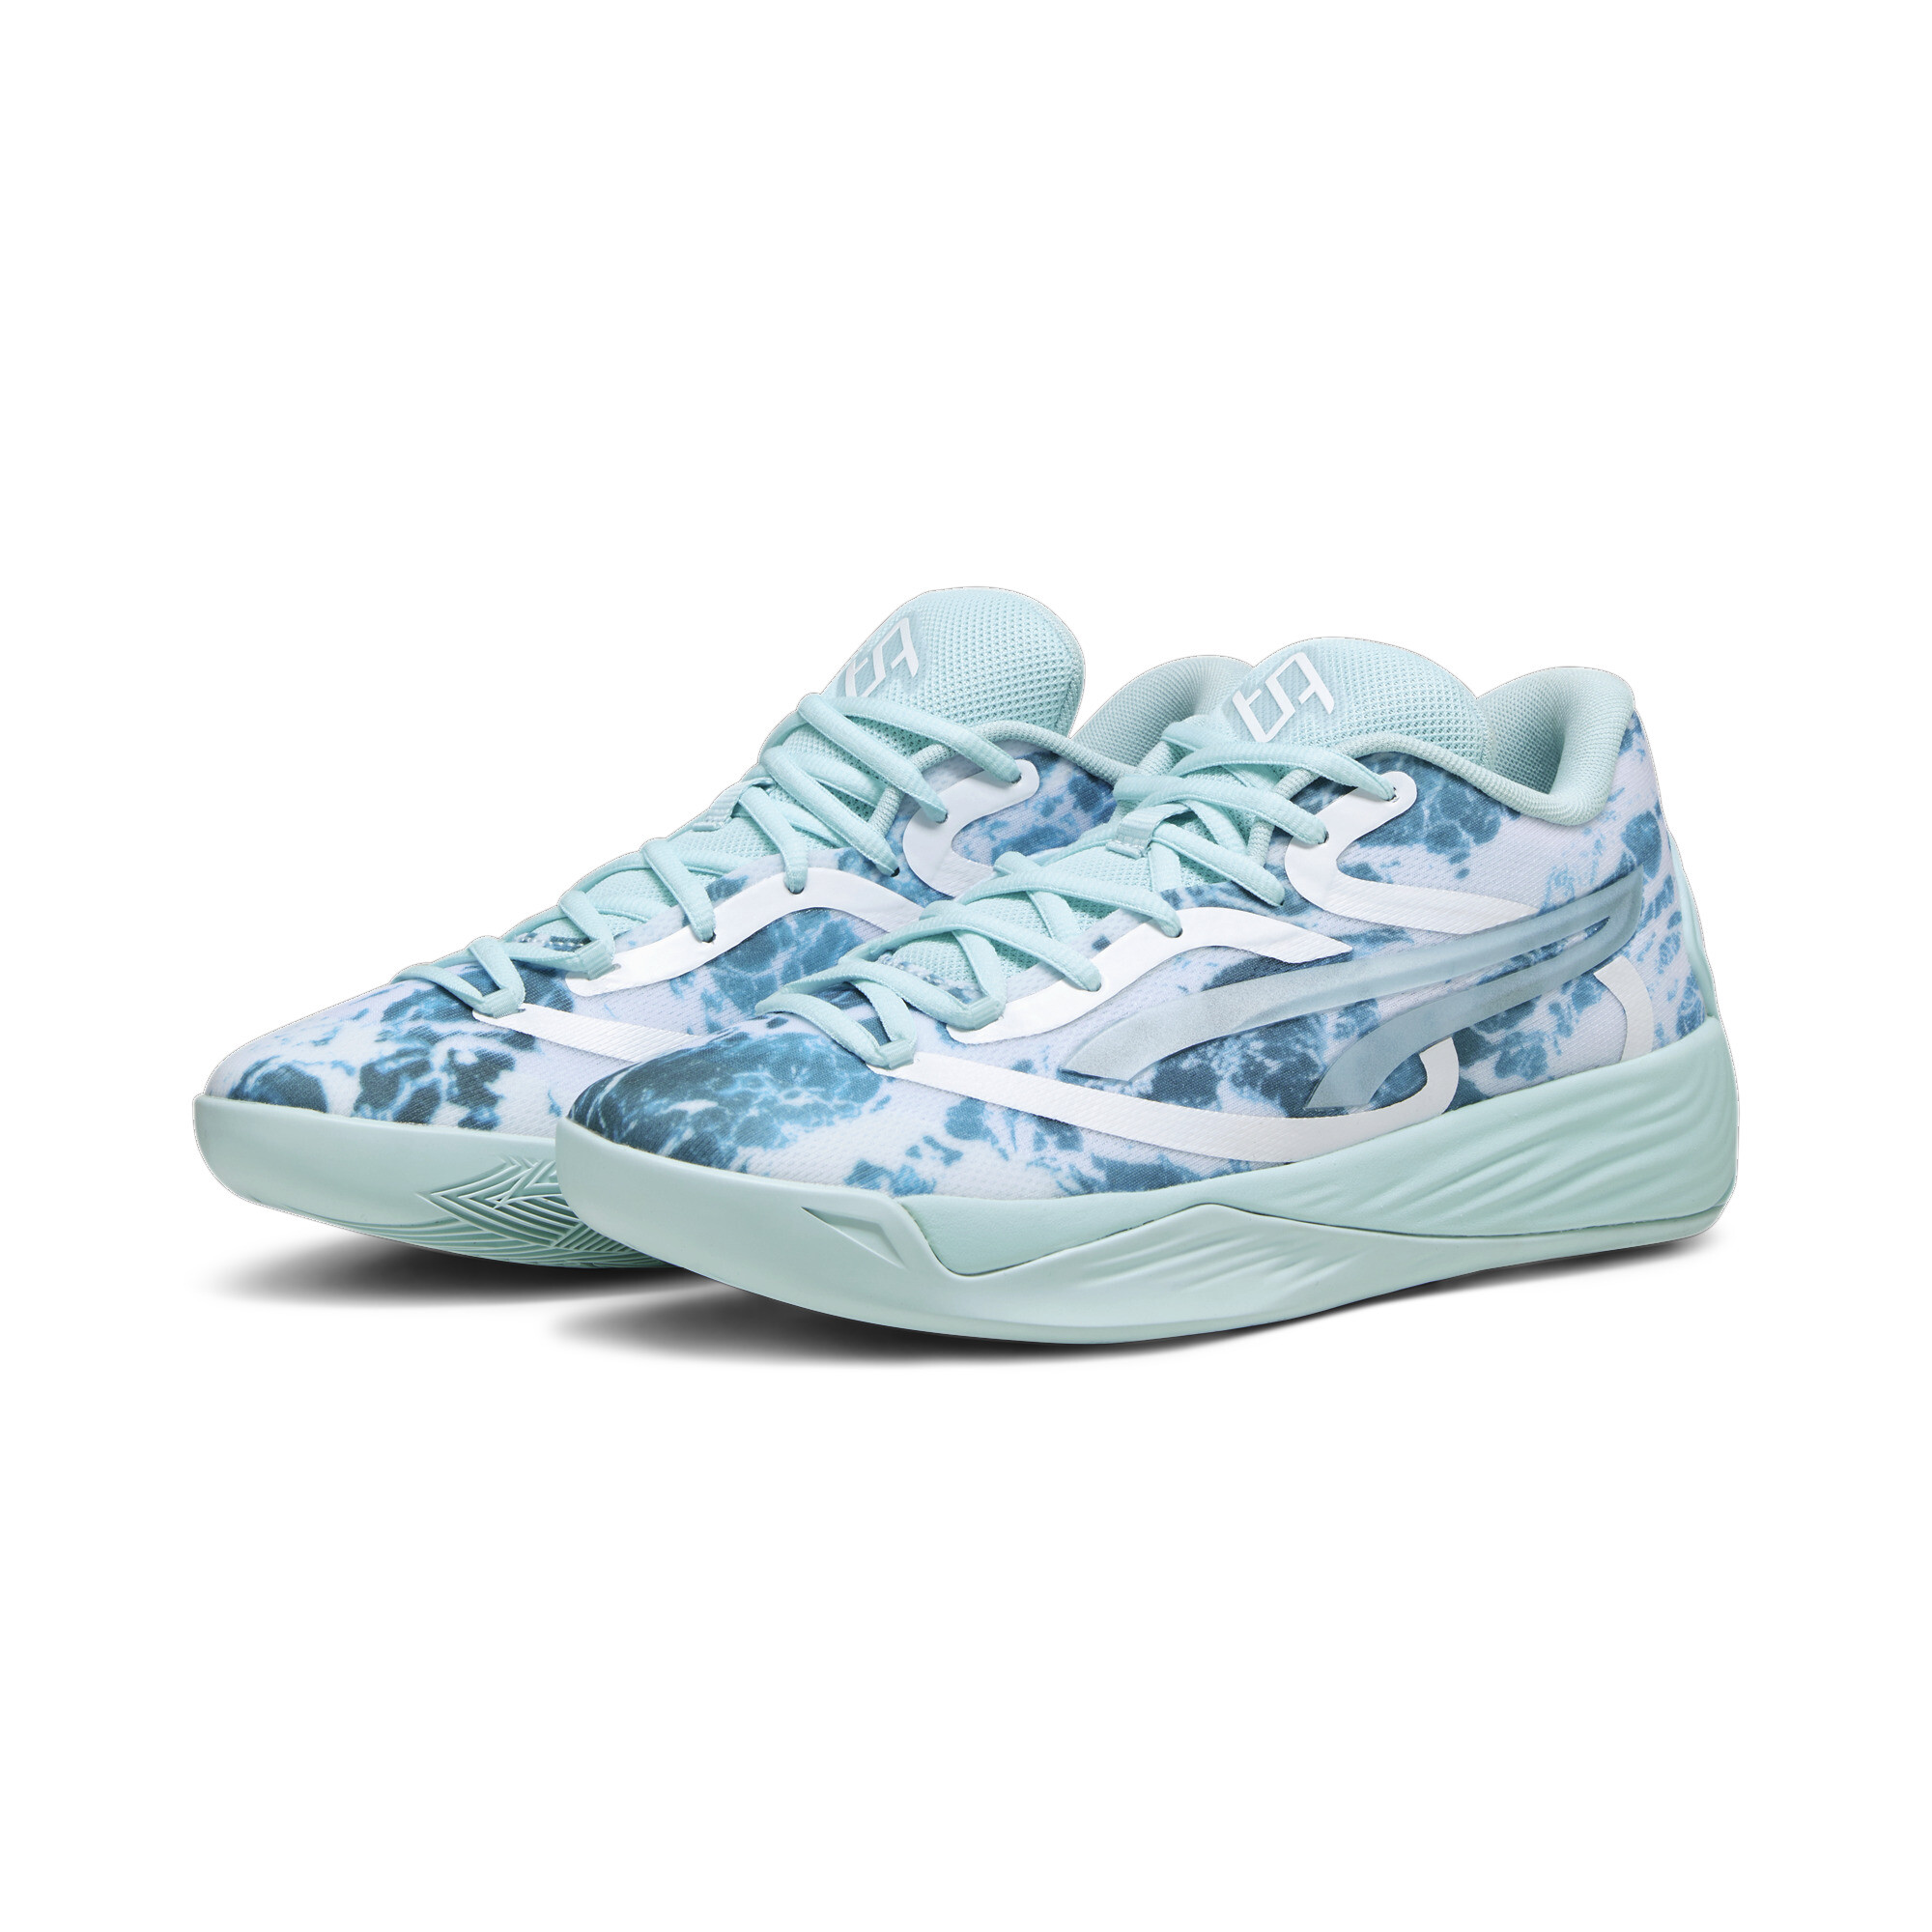 Women's Puma Stewie 2 Water's Basketball Shoes, Blue, Size 46.5, Shoes